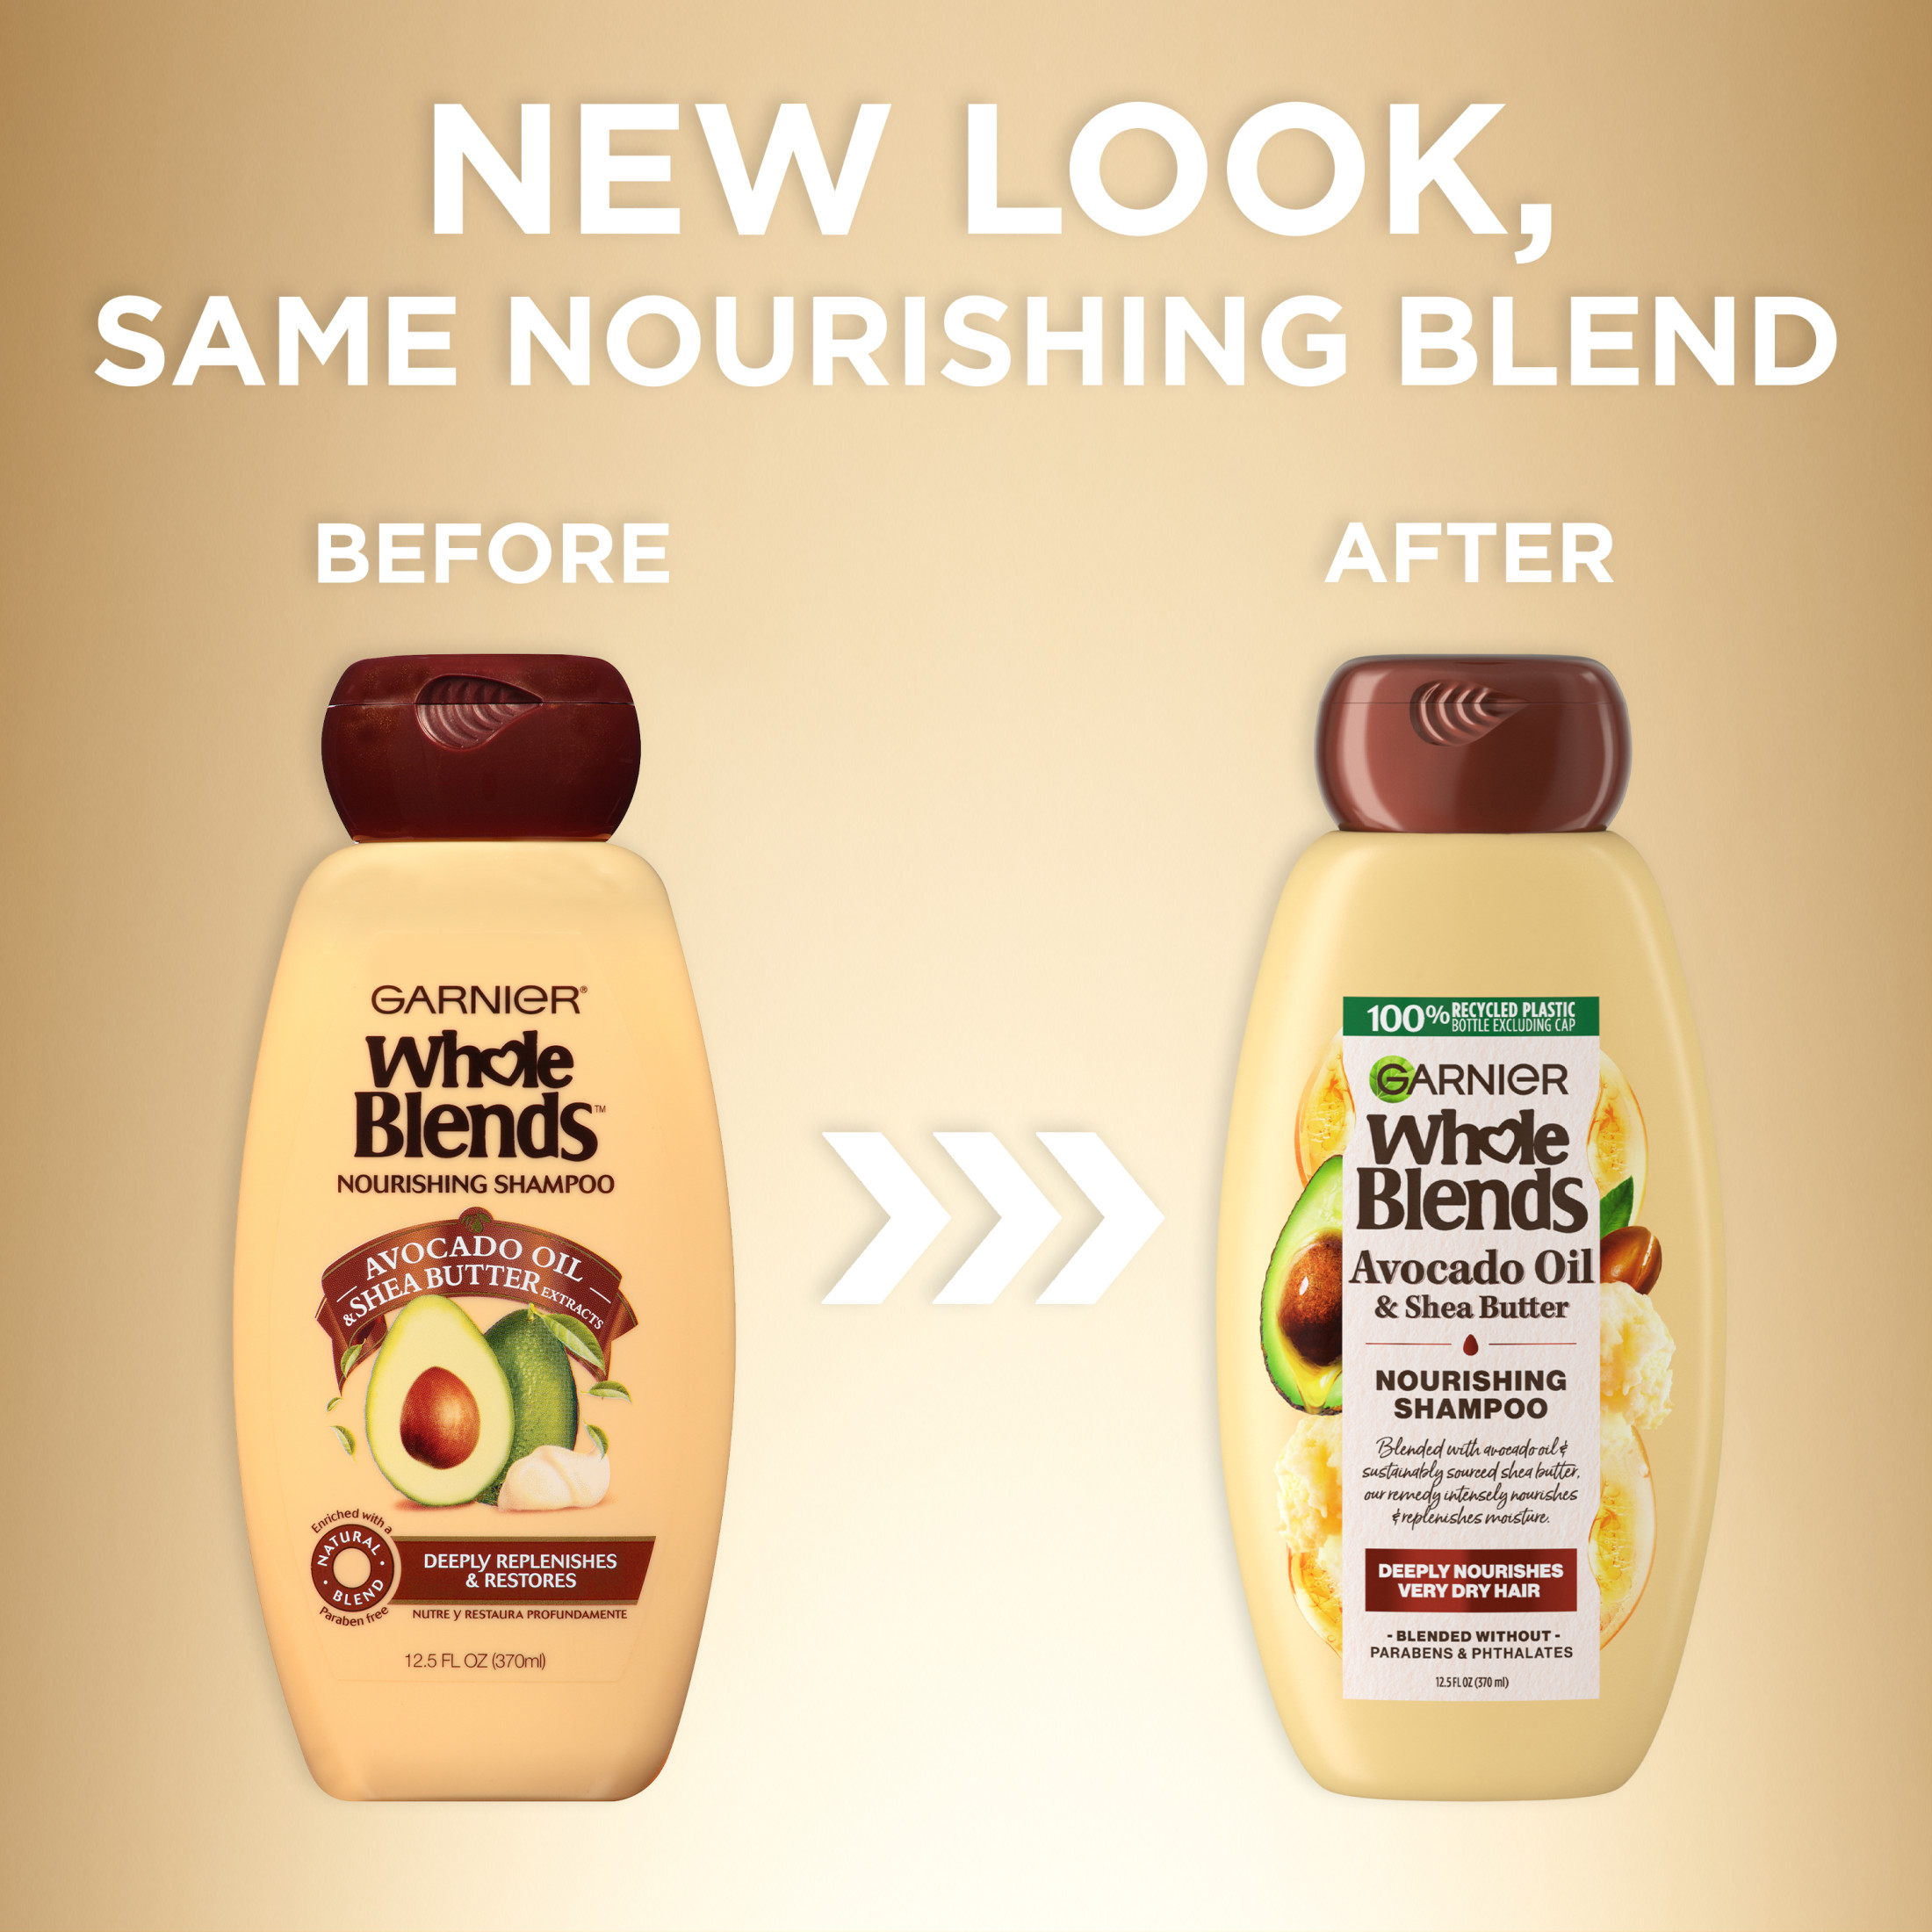 Garnier Whole Blends Nourishing Shampoo with Avocado Oil and Shea Butter, 12.5 fl oz - image 3 of 8